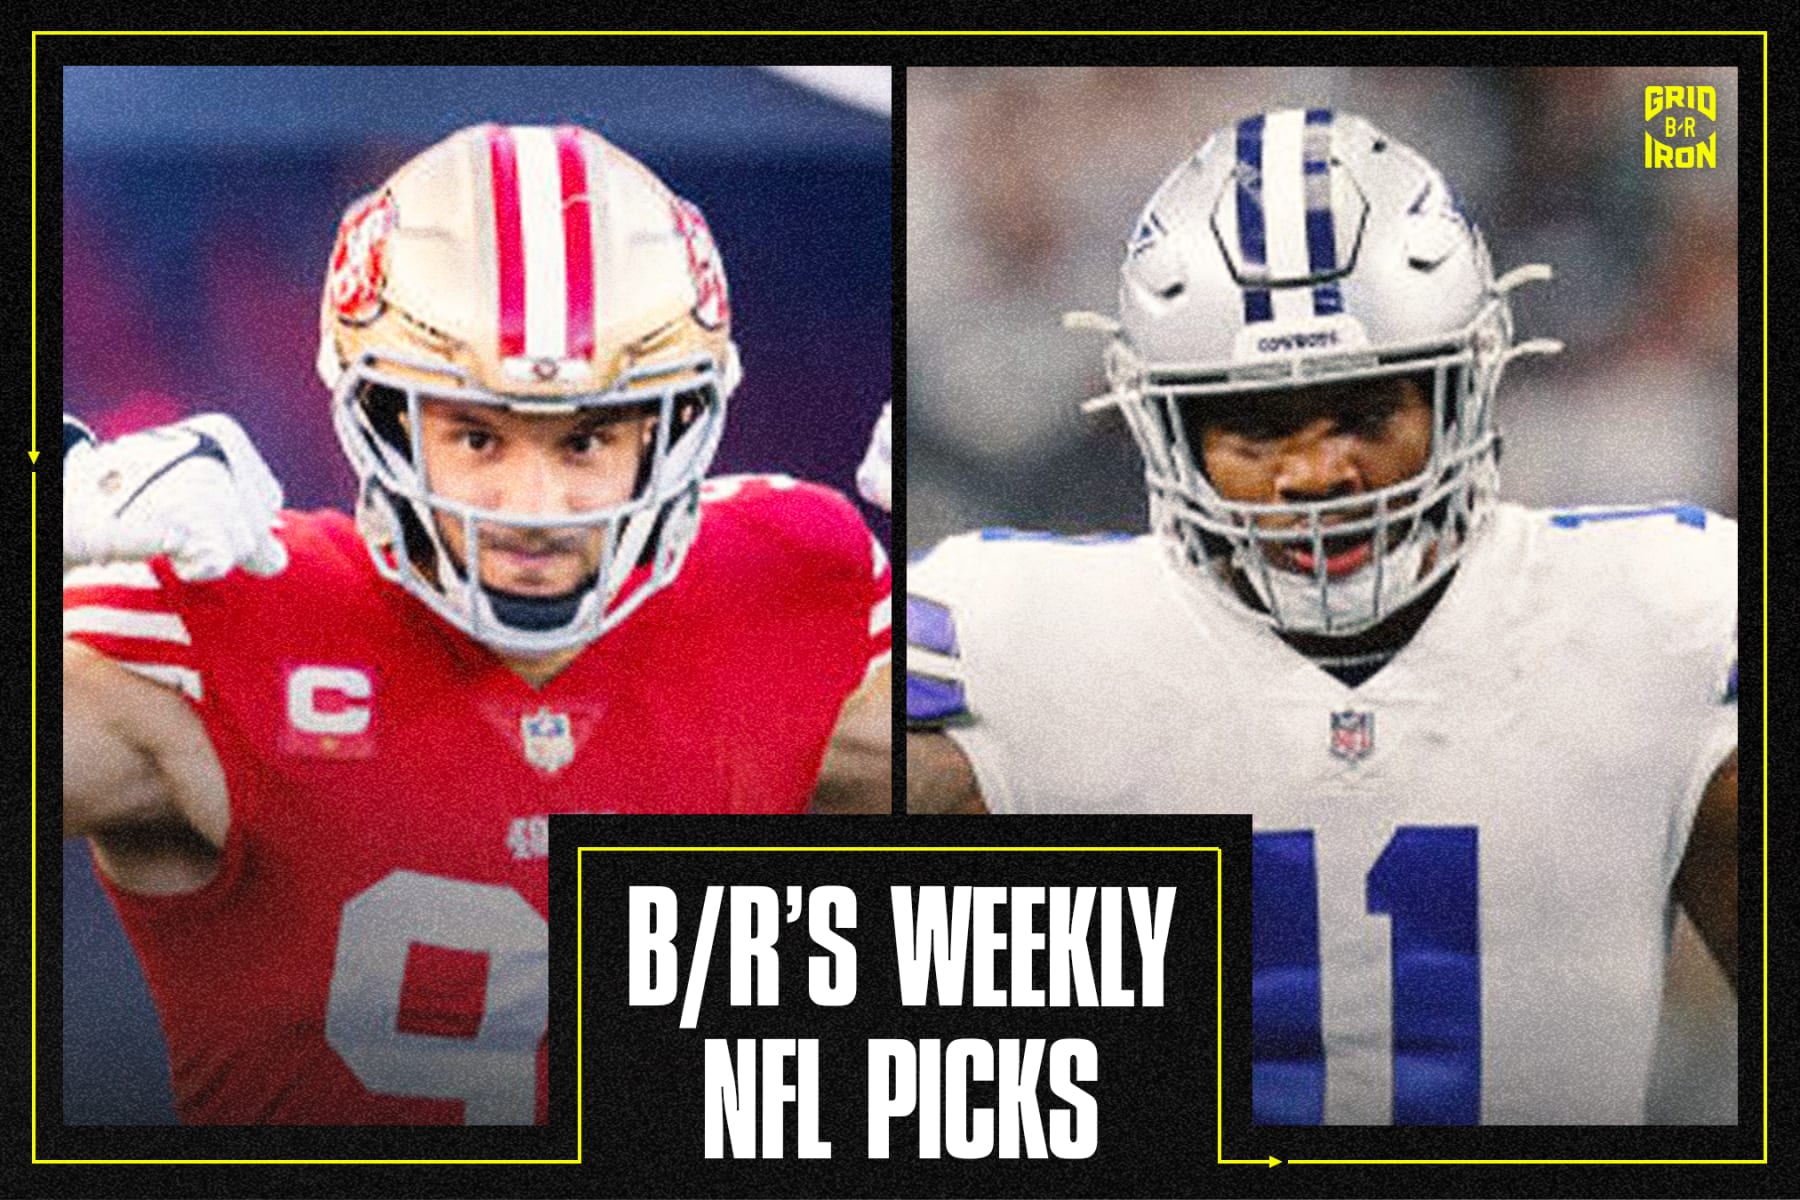 NFL Week 3 picks straight up, against the spread and over/unders